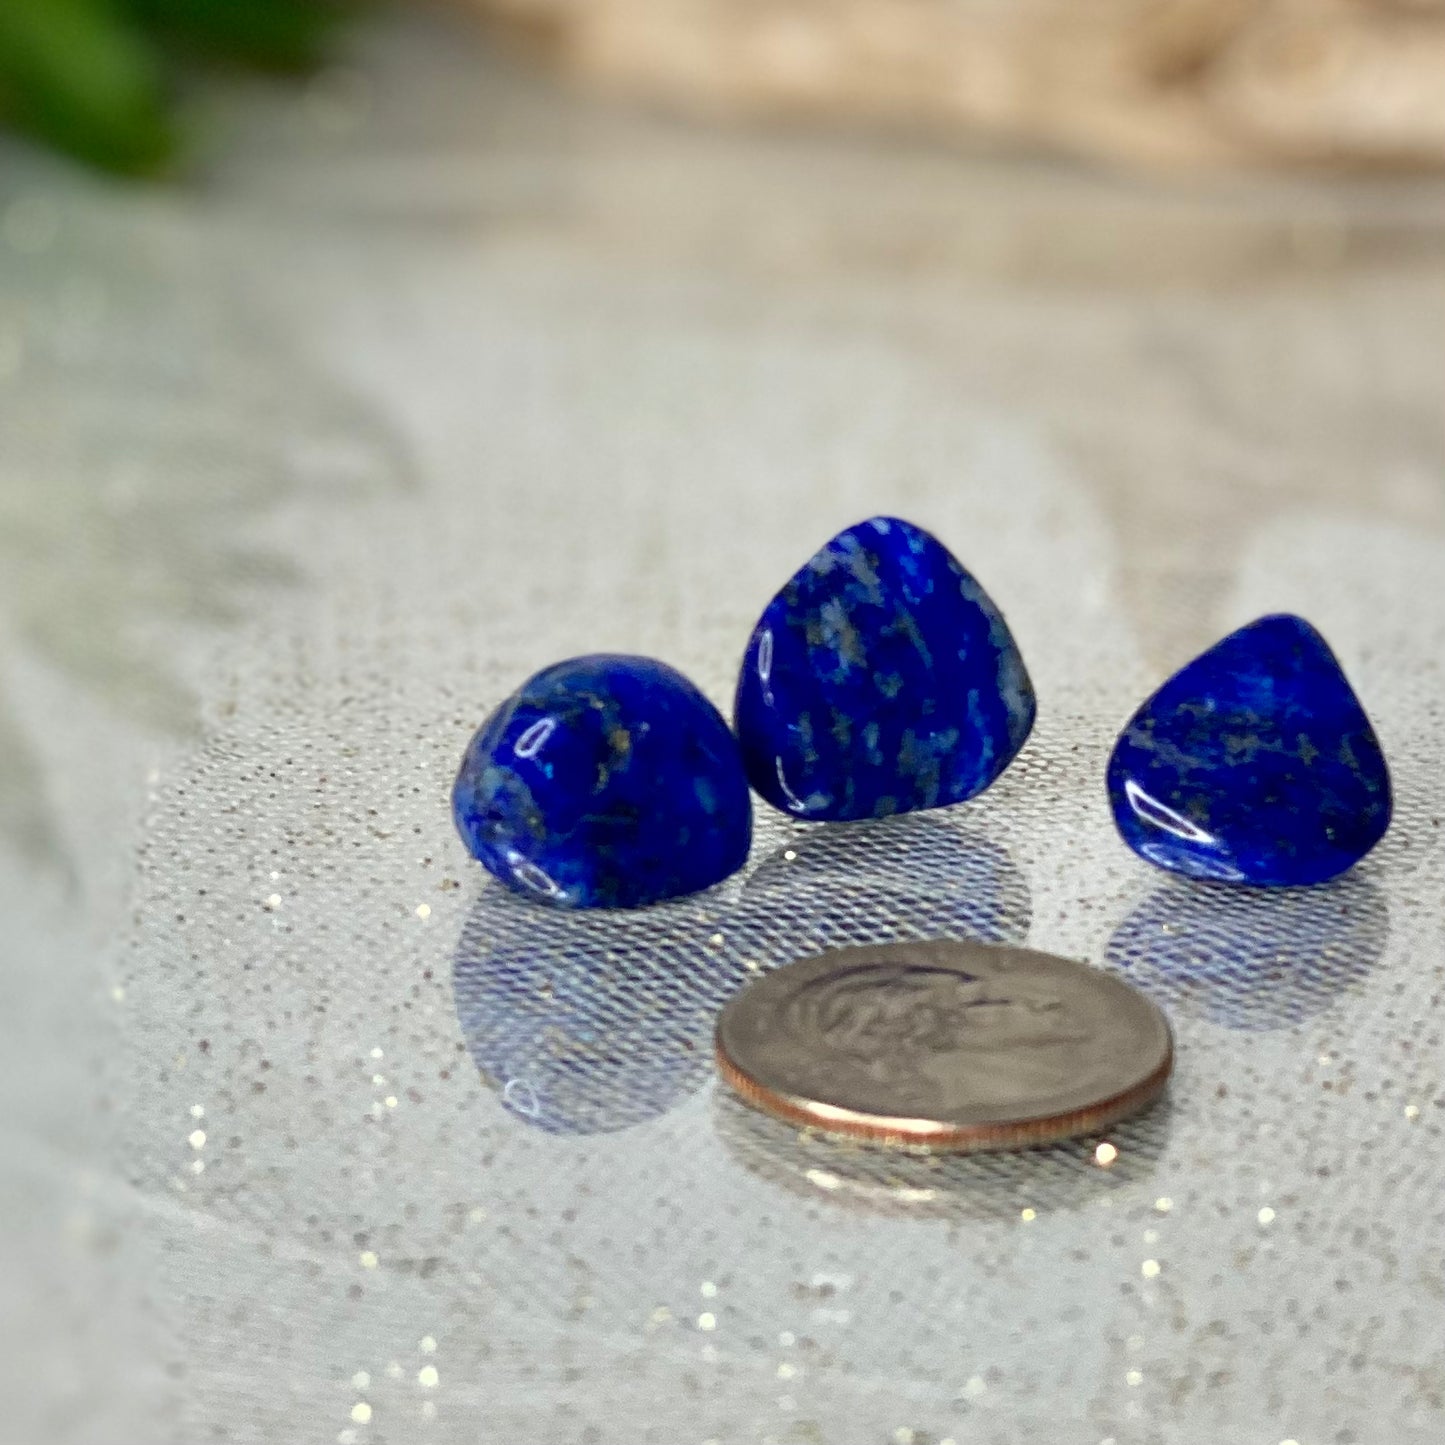 Lapis Lazuli Tumbled Crystals: Embrace Inner Wisdom and Enlightenment